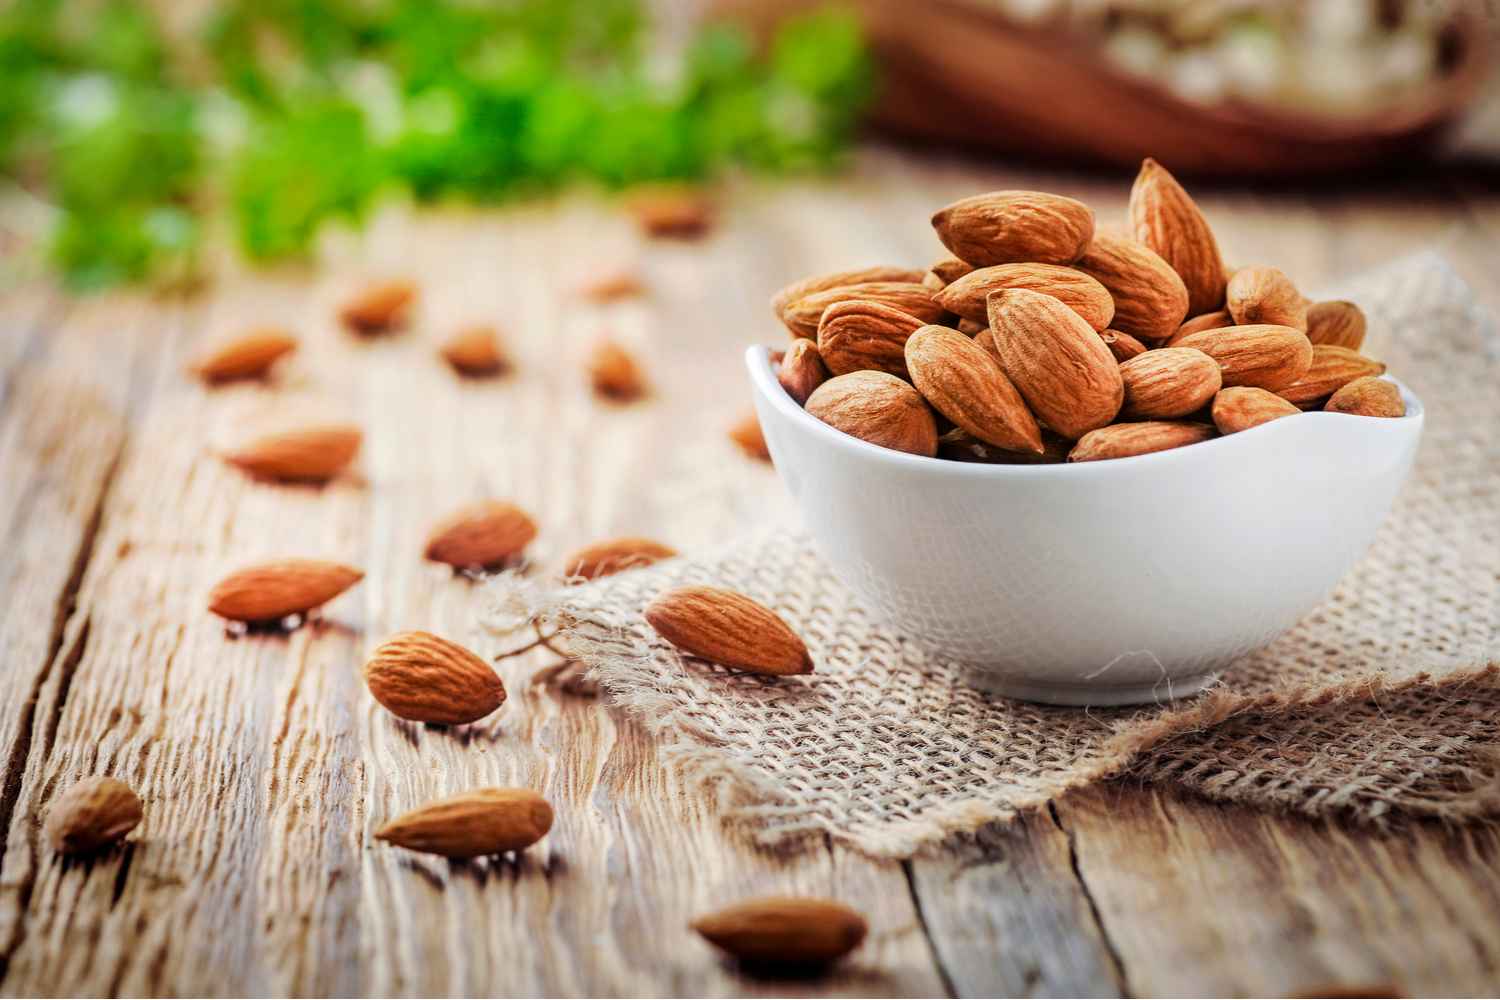 Benefits of Eating Almonds During Pregnancy